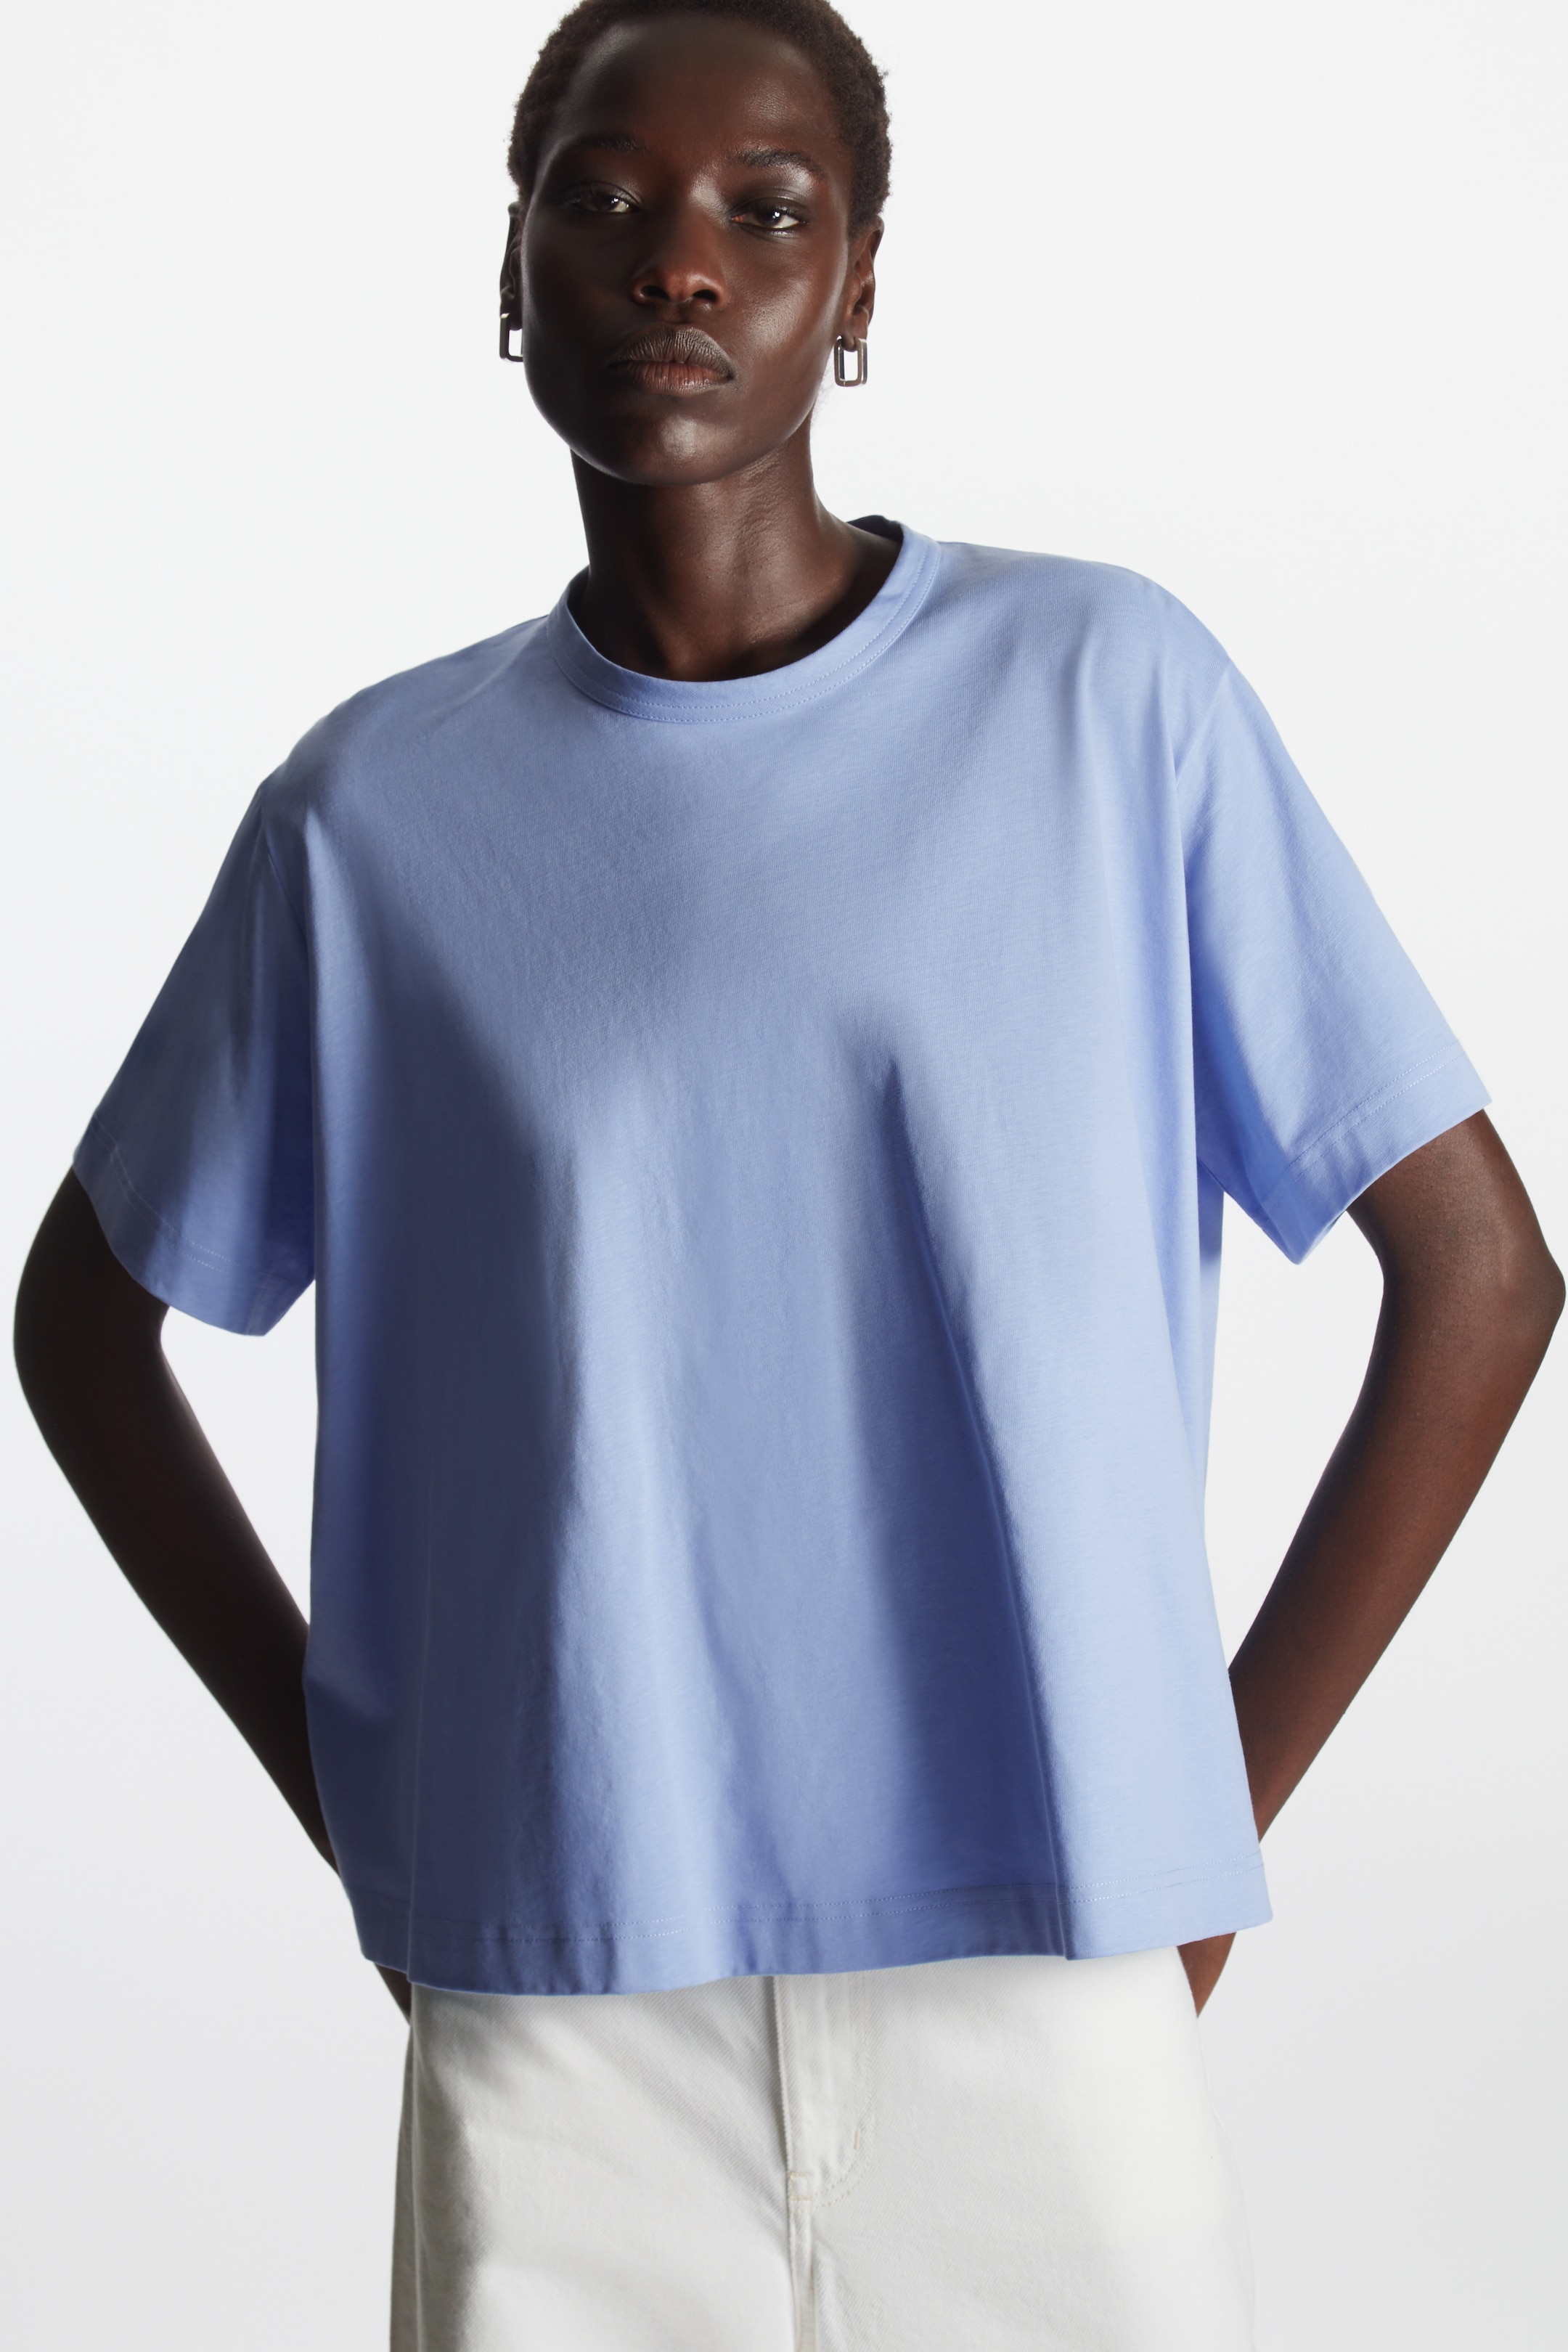 Front image of cos A-LINE T-SHIRT in LIGHT BLUE